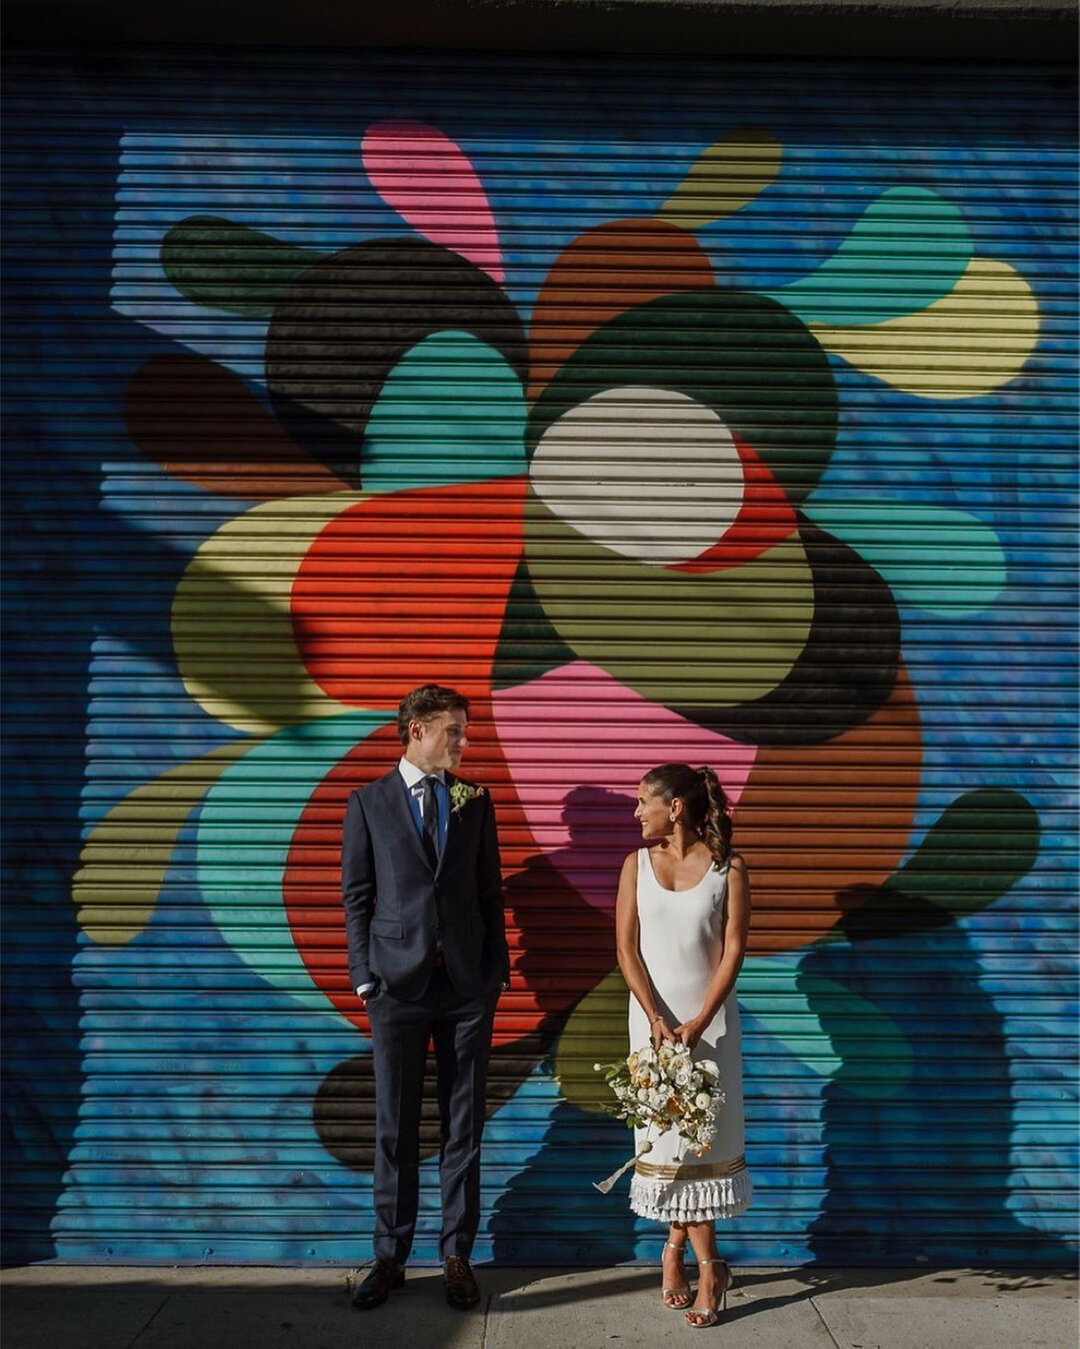 A splash of color for you this fine Wednesday morning! One of my favorite things about the Bay Area is all the street art, anyone else???⠀⠀⠀⠀⠀⠀⠀⠀⠀
 ❤️💚💙💛⠀⠀⠀⠀⠀⠀⠀⠀⠀
⠀⠀⠀⠀⠀⠀⠀⠀⠀
Photo: @vivianchenweddings &amp; @erinpradophoto⠀⠀⠀⠀⠀⠀⠀⠀⠀
Planner: @theyso